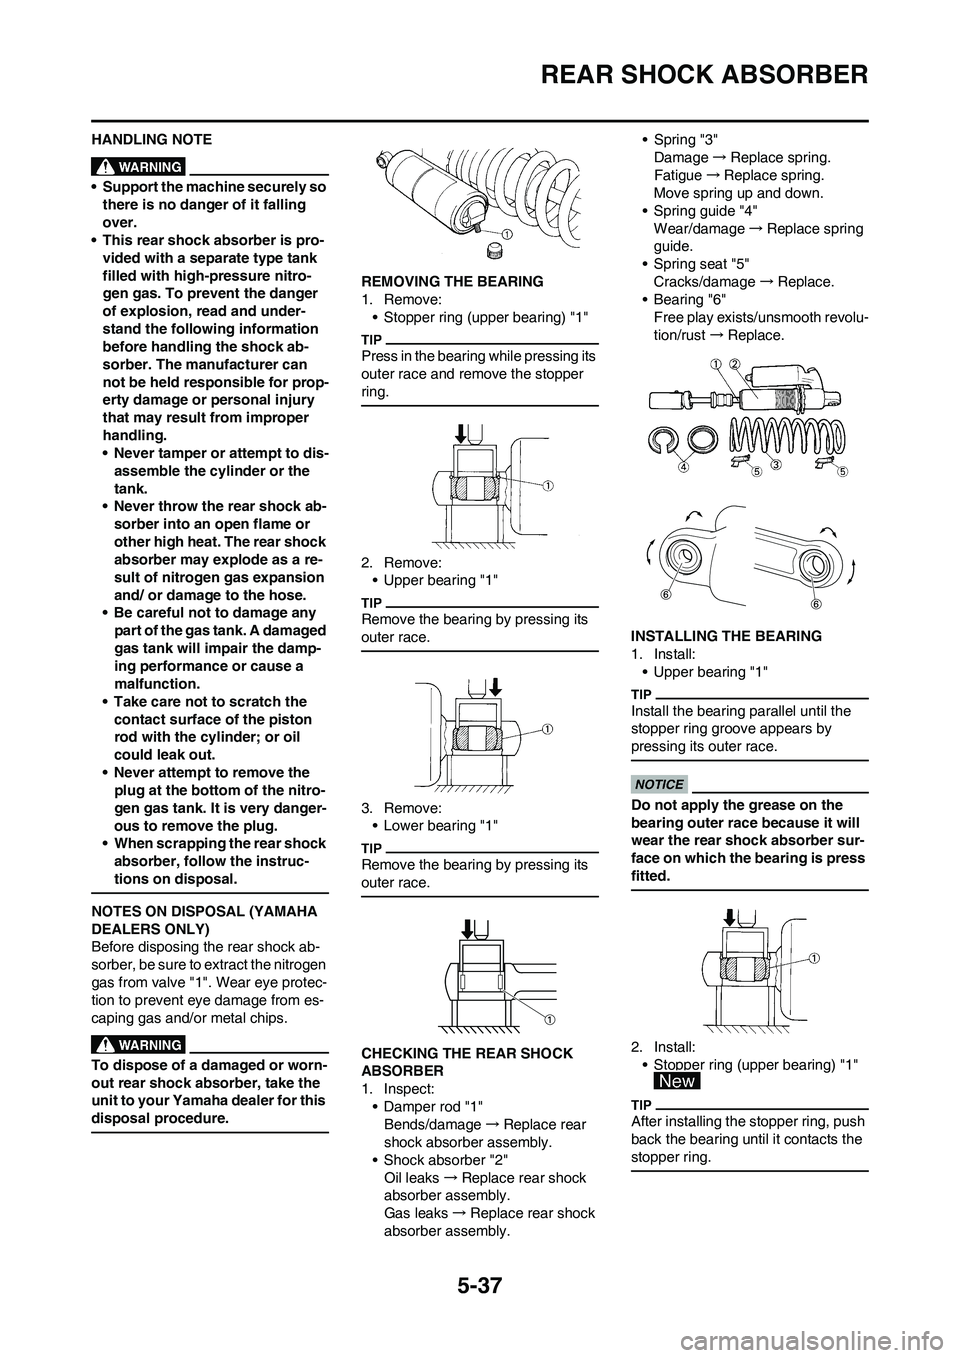 YAMAHA YZ450F 2009  Owners Manual 5-37
REAR SHOCK ABSORBER
HANDLING NOTE
• Support the machine securely so 
there is no danger of it falling 
over.
• This rear shock absorber is pro-
vided with a separate type tank 
filled with hi